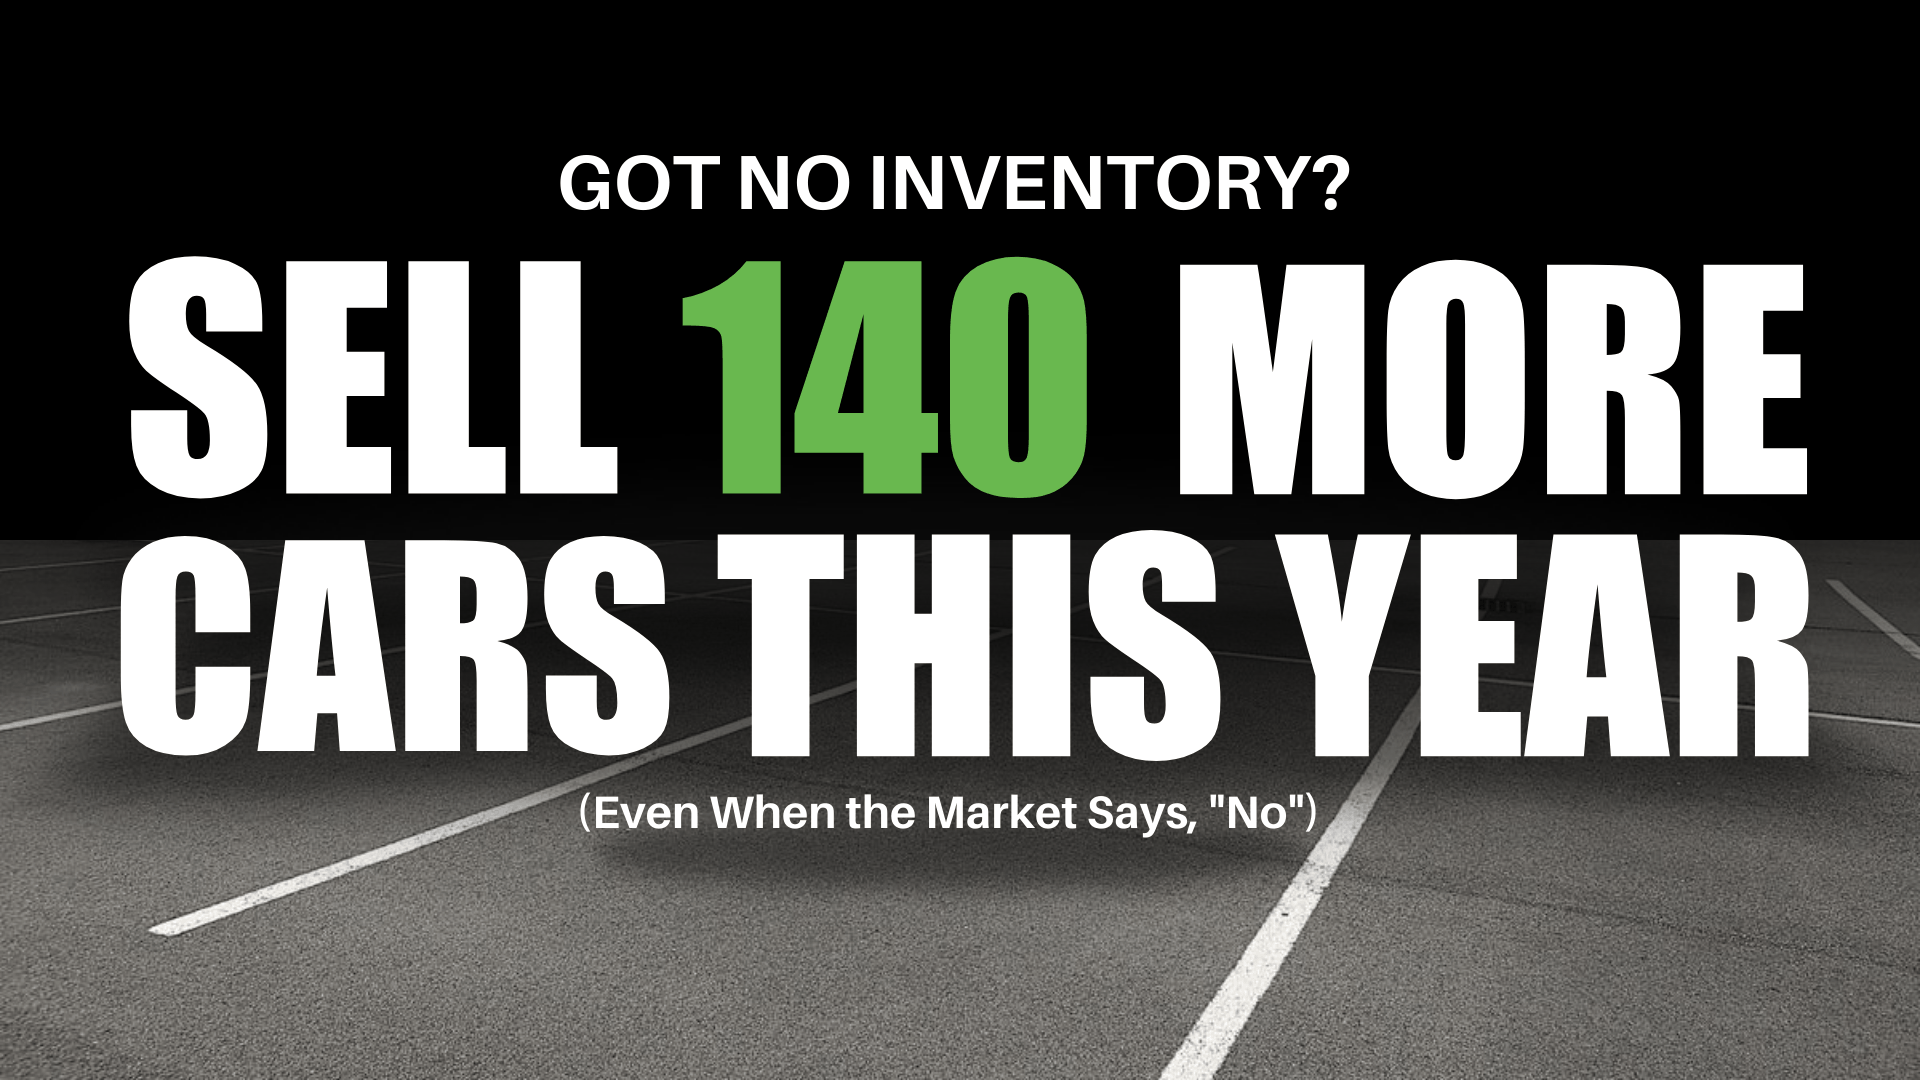 Got No Inventory? Sell 140 More Cars This Year (Even When the Market Says "No")